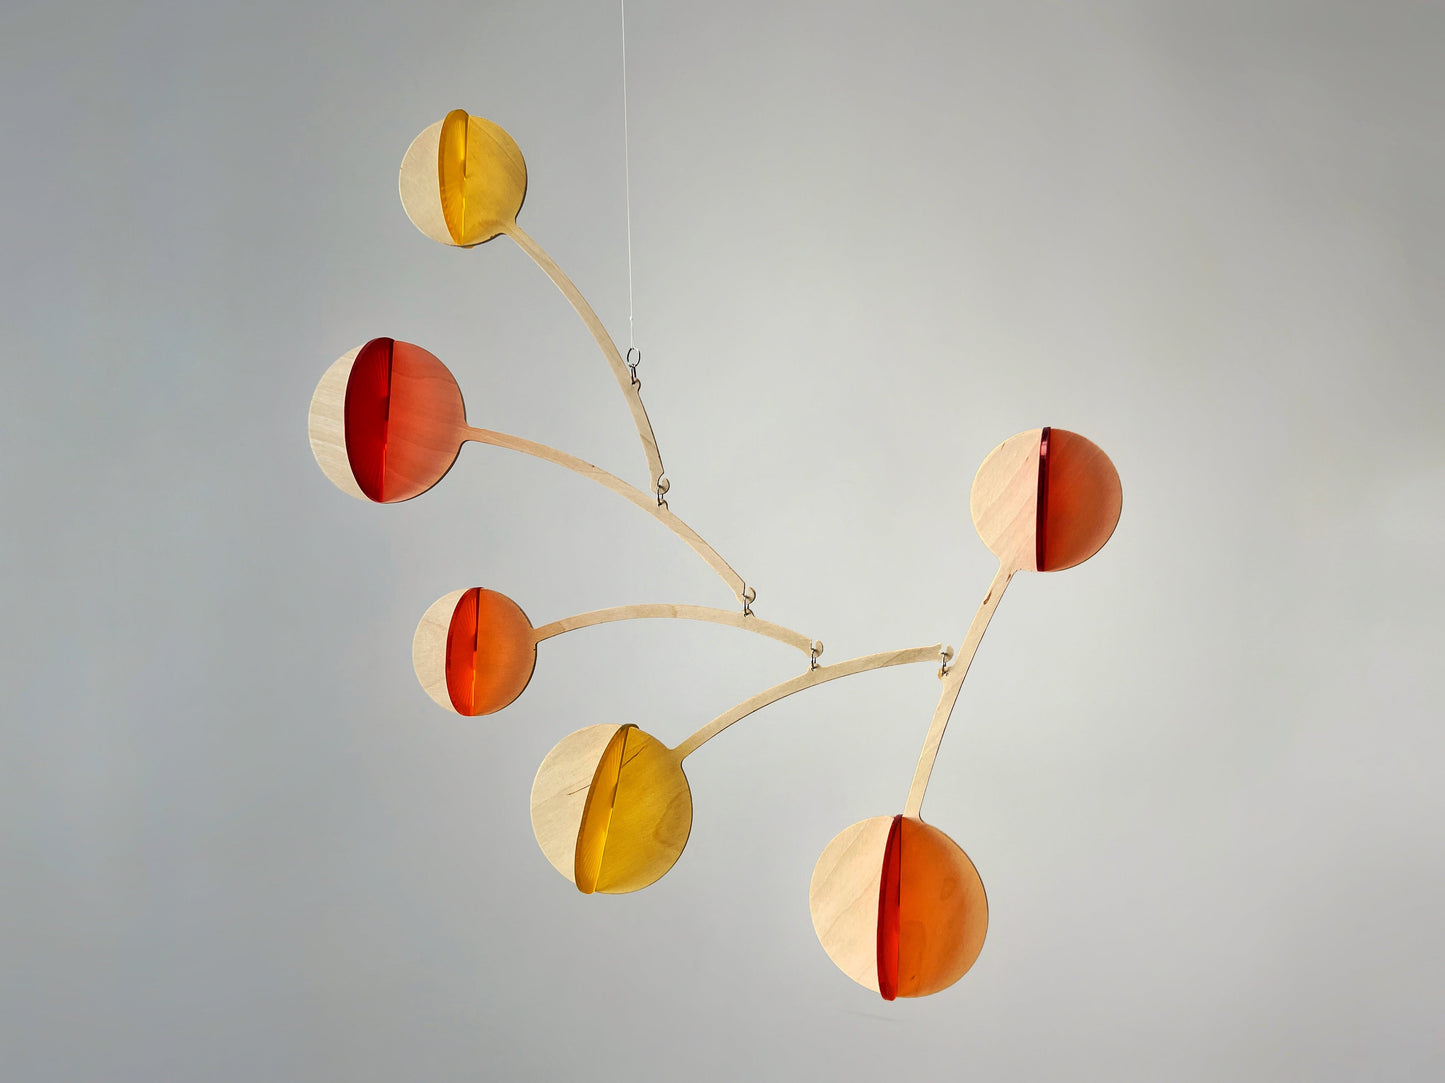 red mobile, orange mobile, yellow mobile. Calder mobile, mobile and Baby mobile. Moon Mobile, vintage mobile and kinetic mobile. Abstract Art, Hanging Mobile and Kinetic Mobile. Modern Mobile. Mid Century Modern and Hanging Sculpture, retro mobile